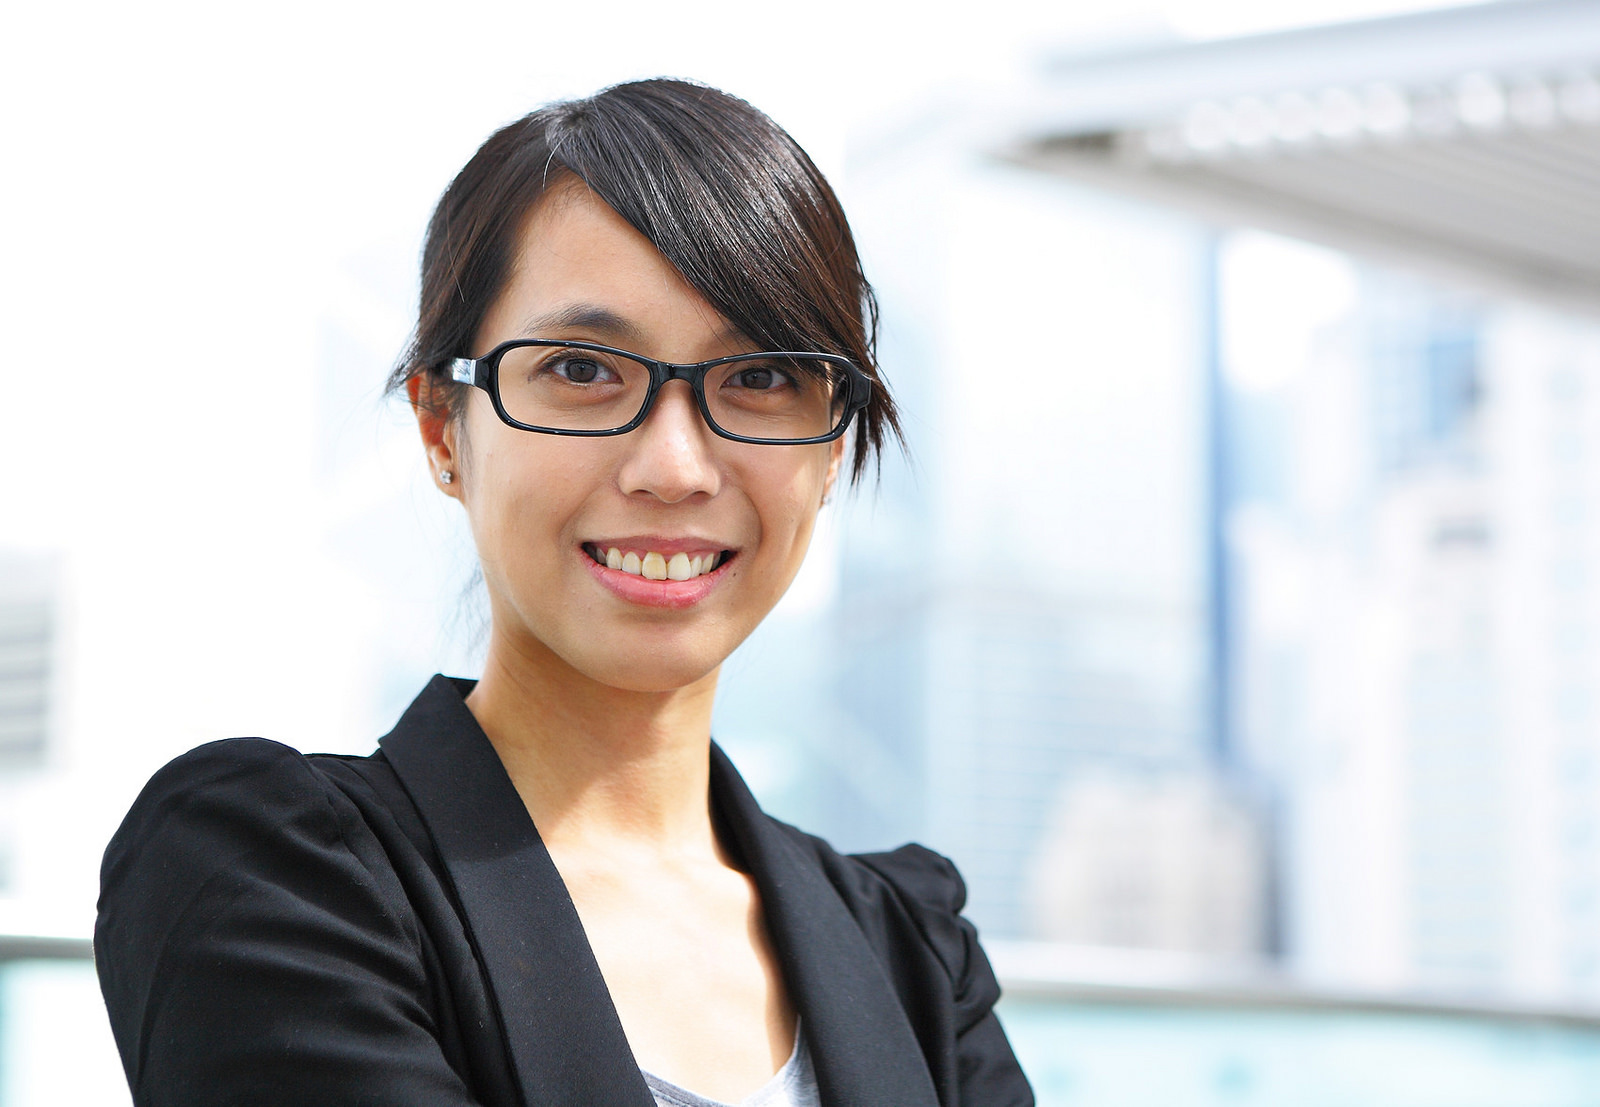 A smiling woman in a business suit, published as part of: 